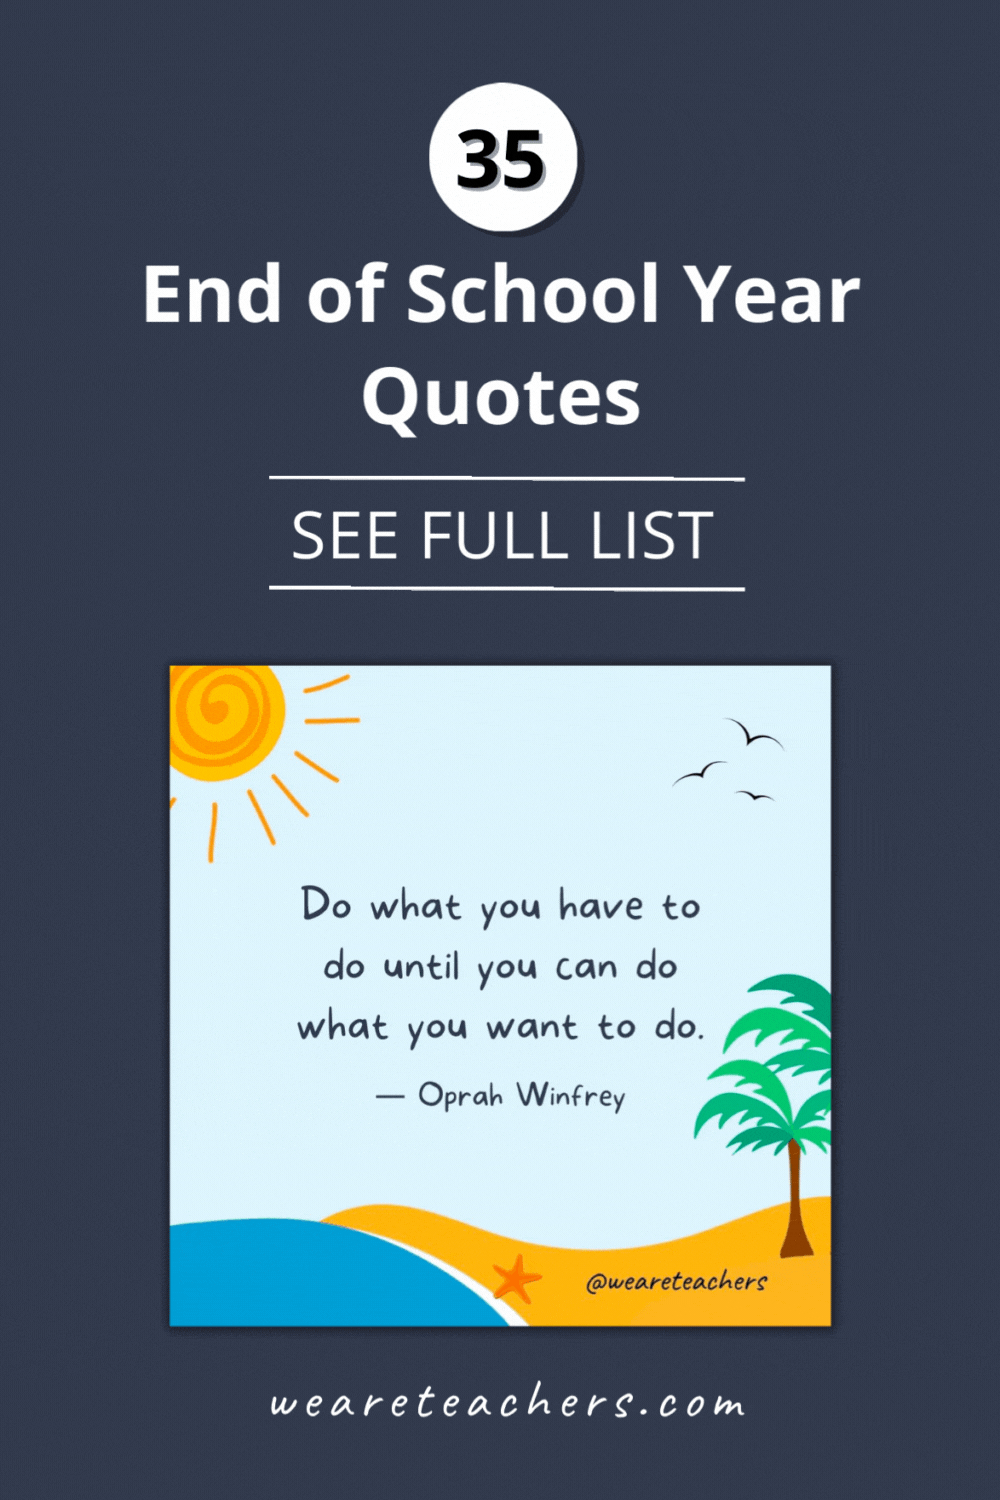 Can you believe the year is ending already? Check out this list of the Best End of School Year Quotes to honor this important moment!